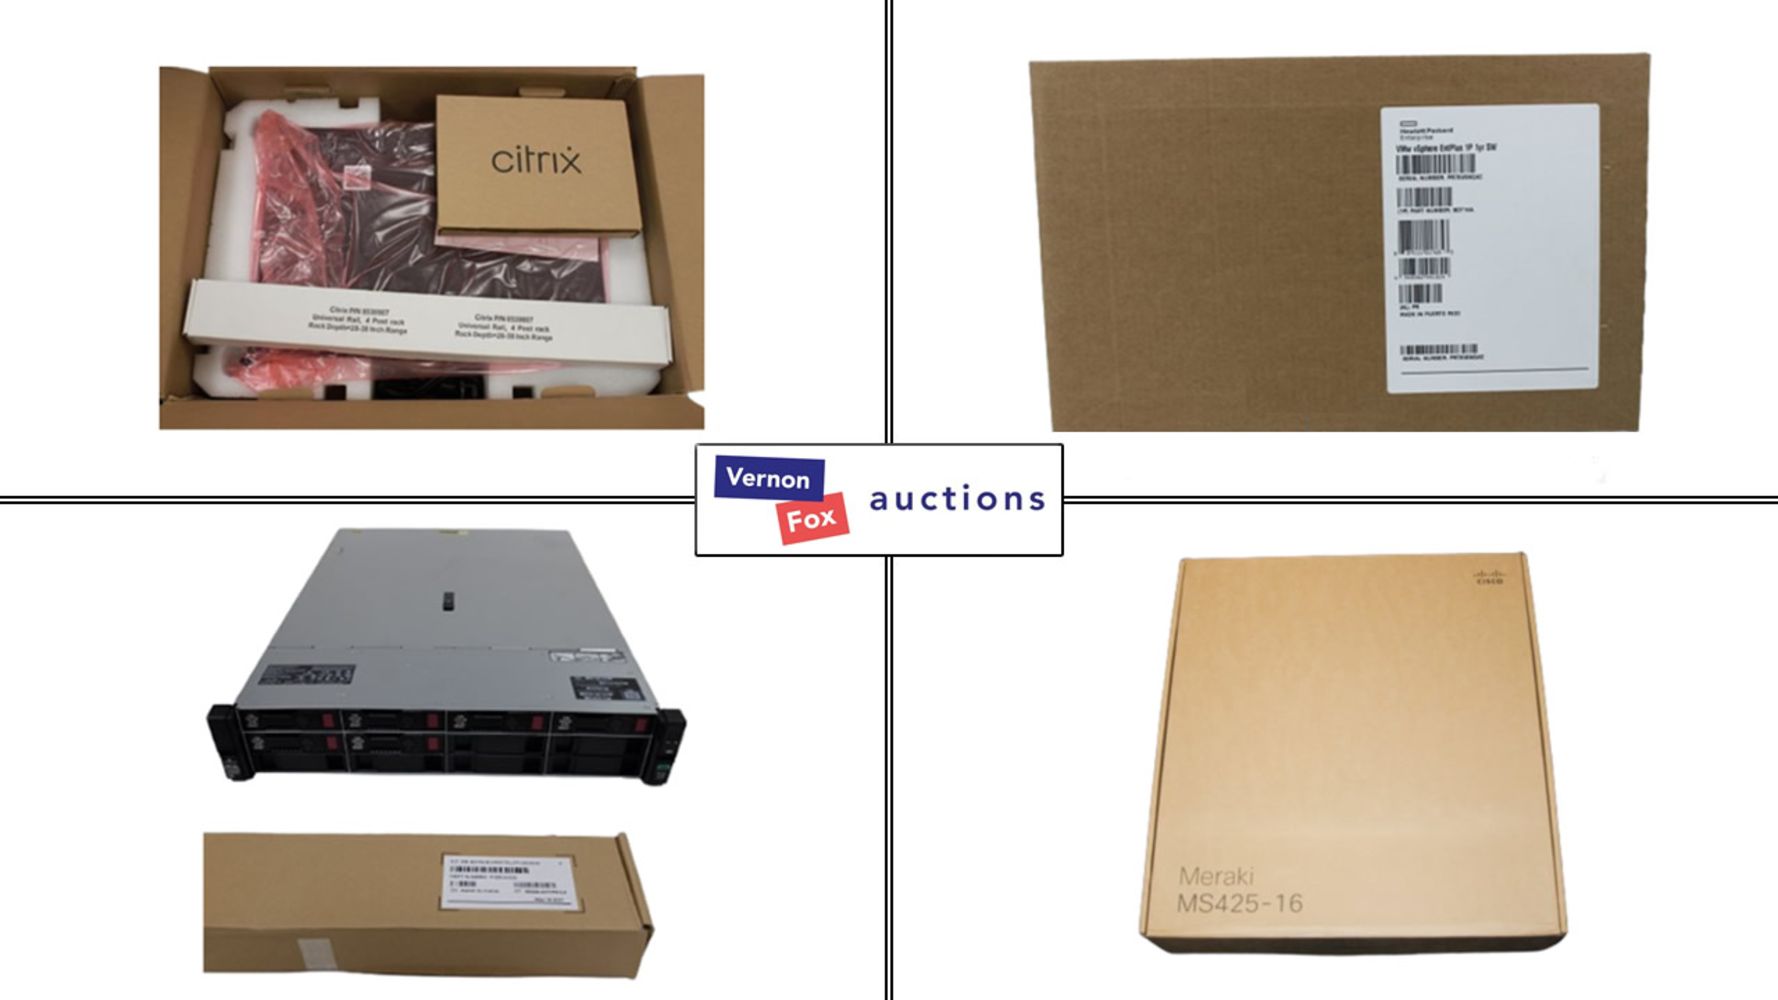 FREE UK DELIVERY: Stock Clearance of Networking Devices and Related Items at Superb Prices